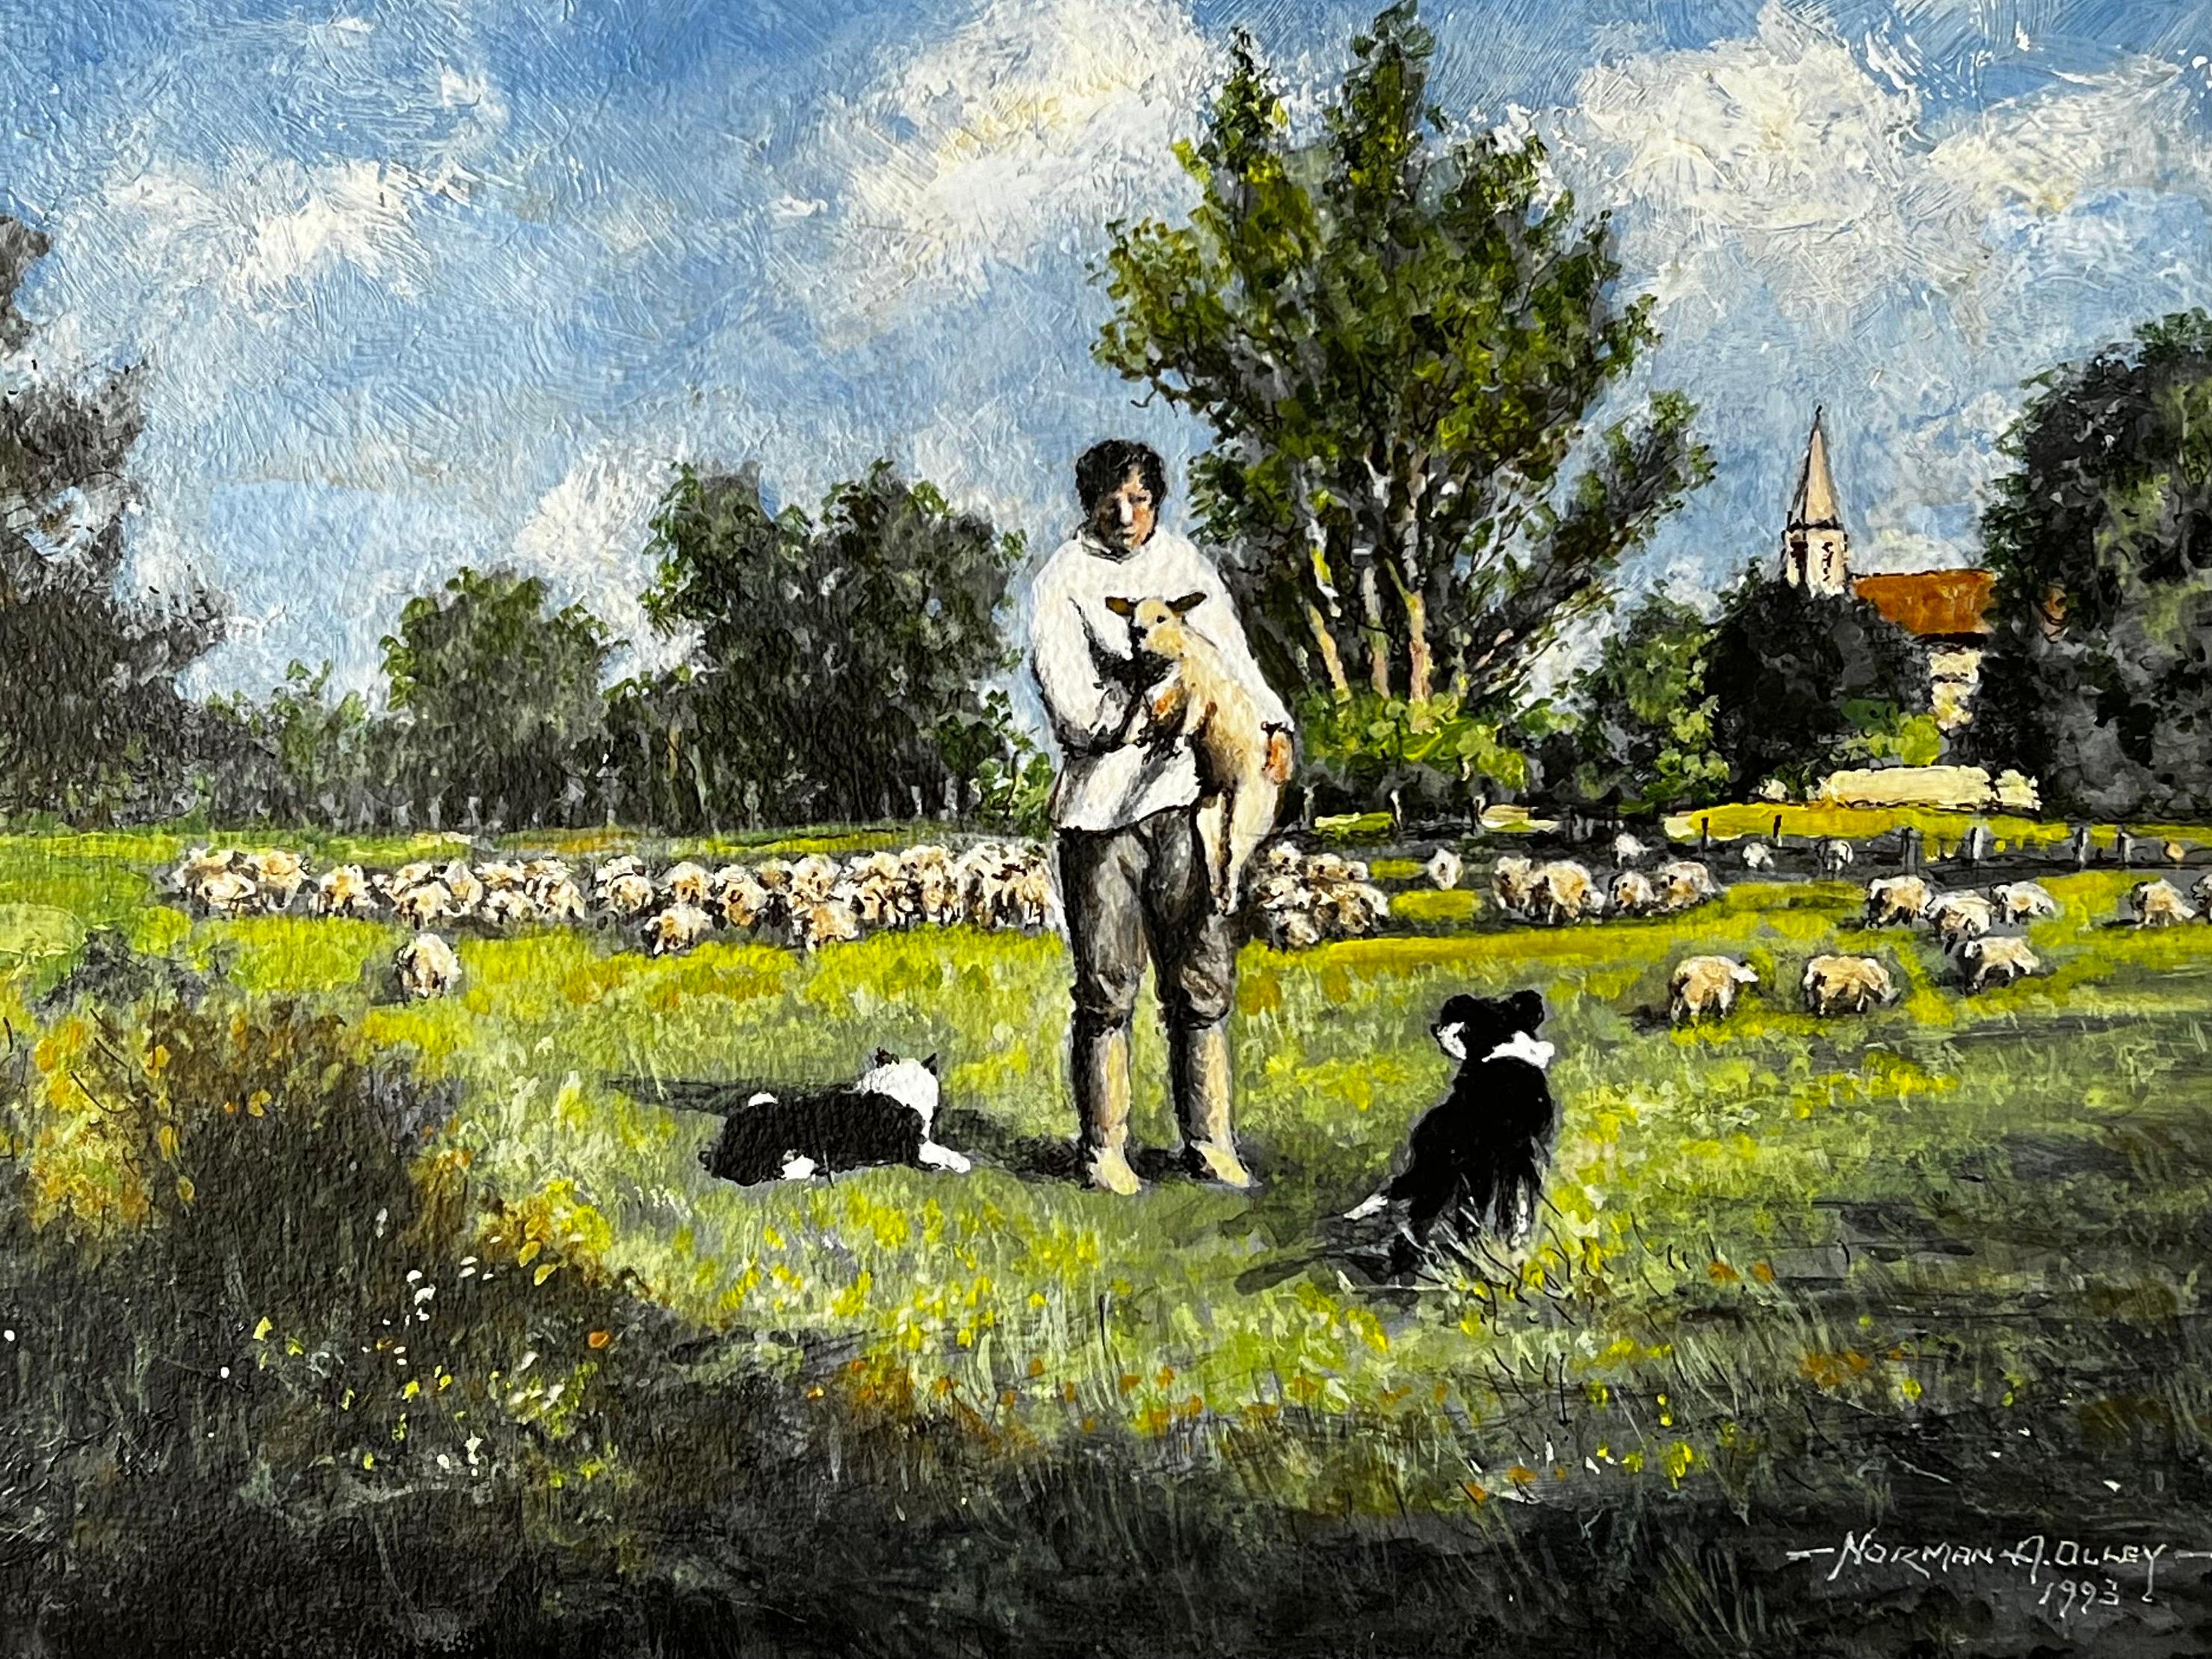 The Shepherd And His Sheep Dog Tending Flock In The Green Pastures Of Spring - Painting by Norman A Olley